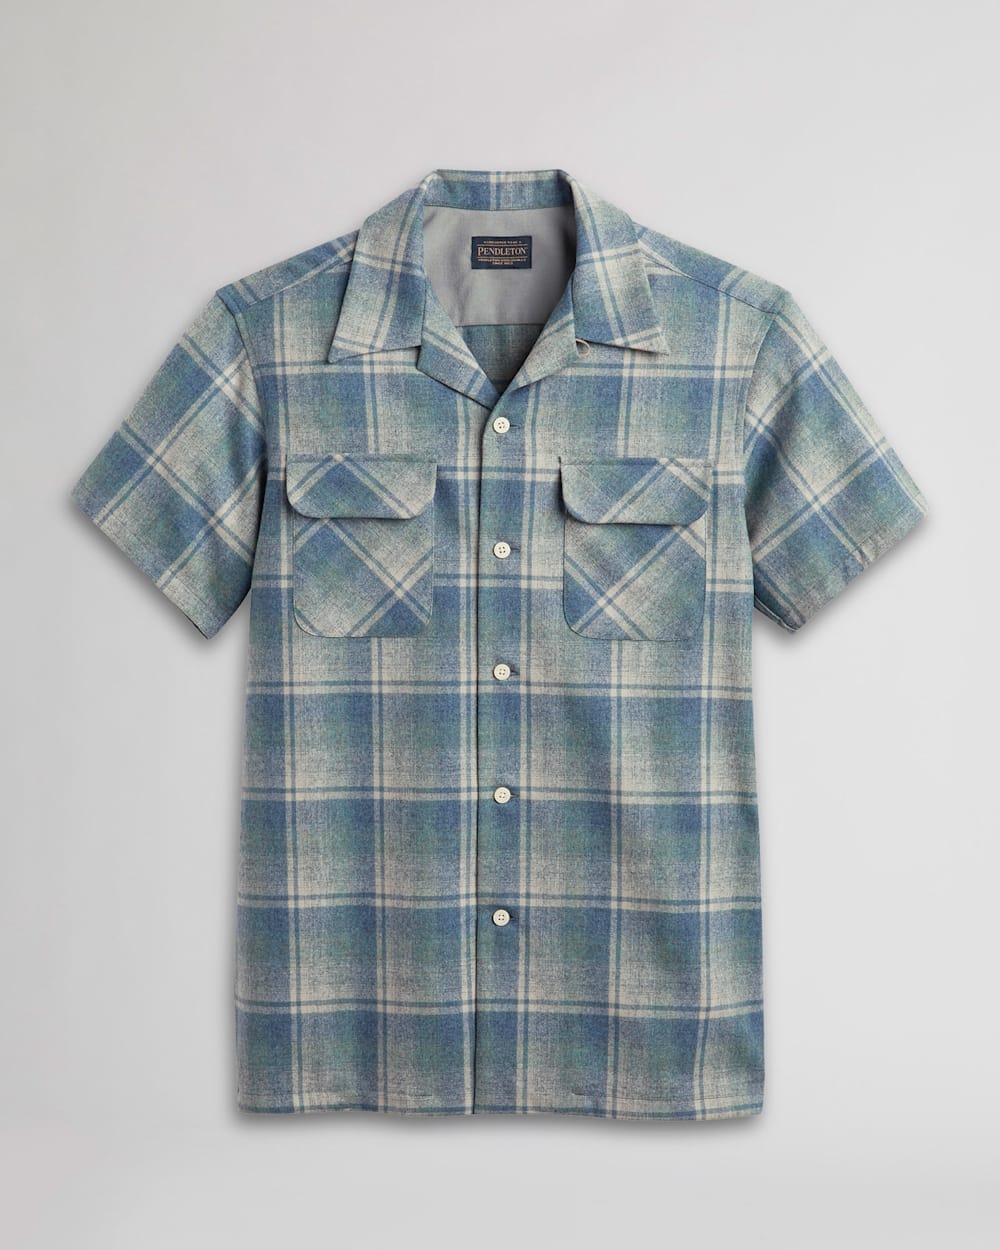 ALTERNATE VIEW OF MEN'S PLAID SHORT-SLEEVE BOARD SHIRT IN BLUE MIX PLAID image number 6